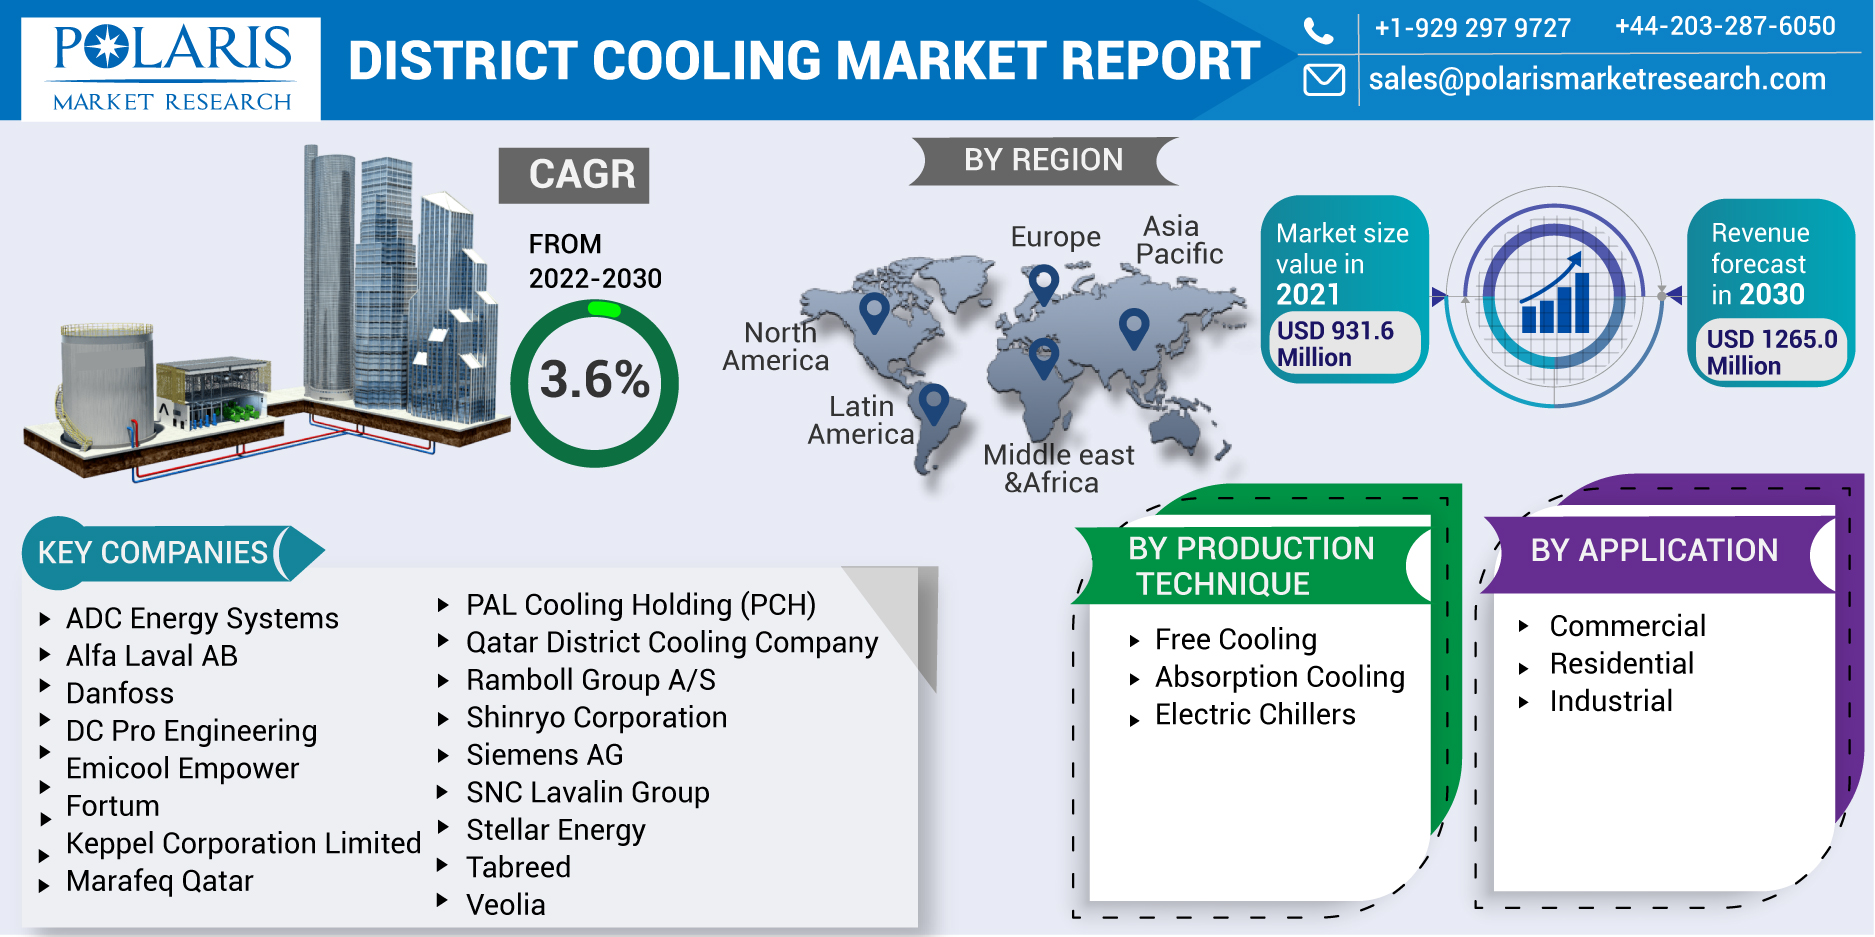 DISTRICT_COOLING_MARKET_REPORT-0110